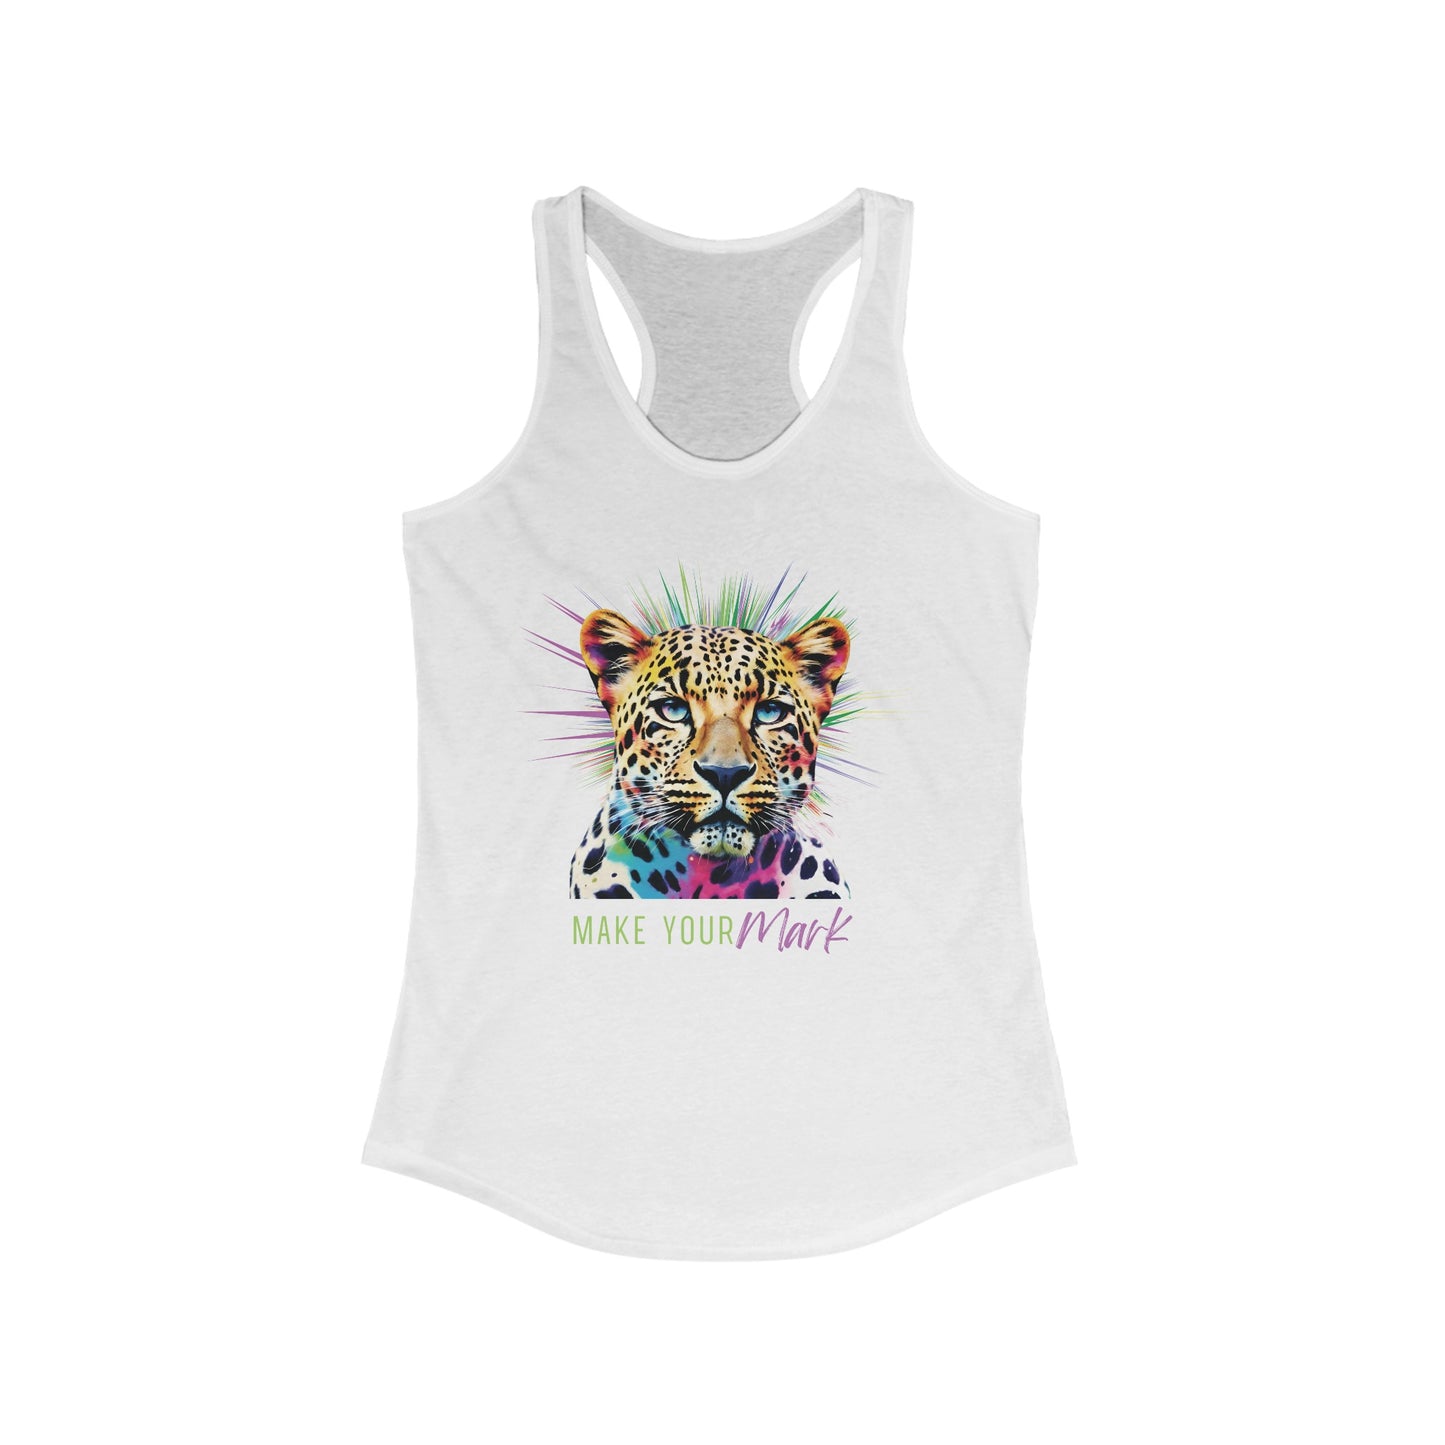 Make your mark Tank Top